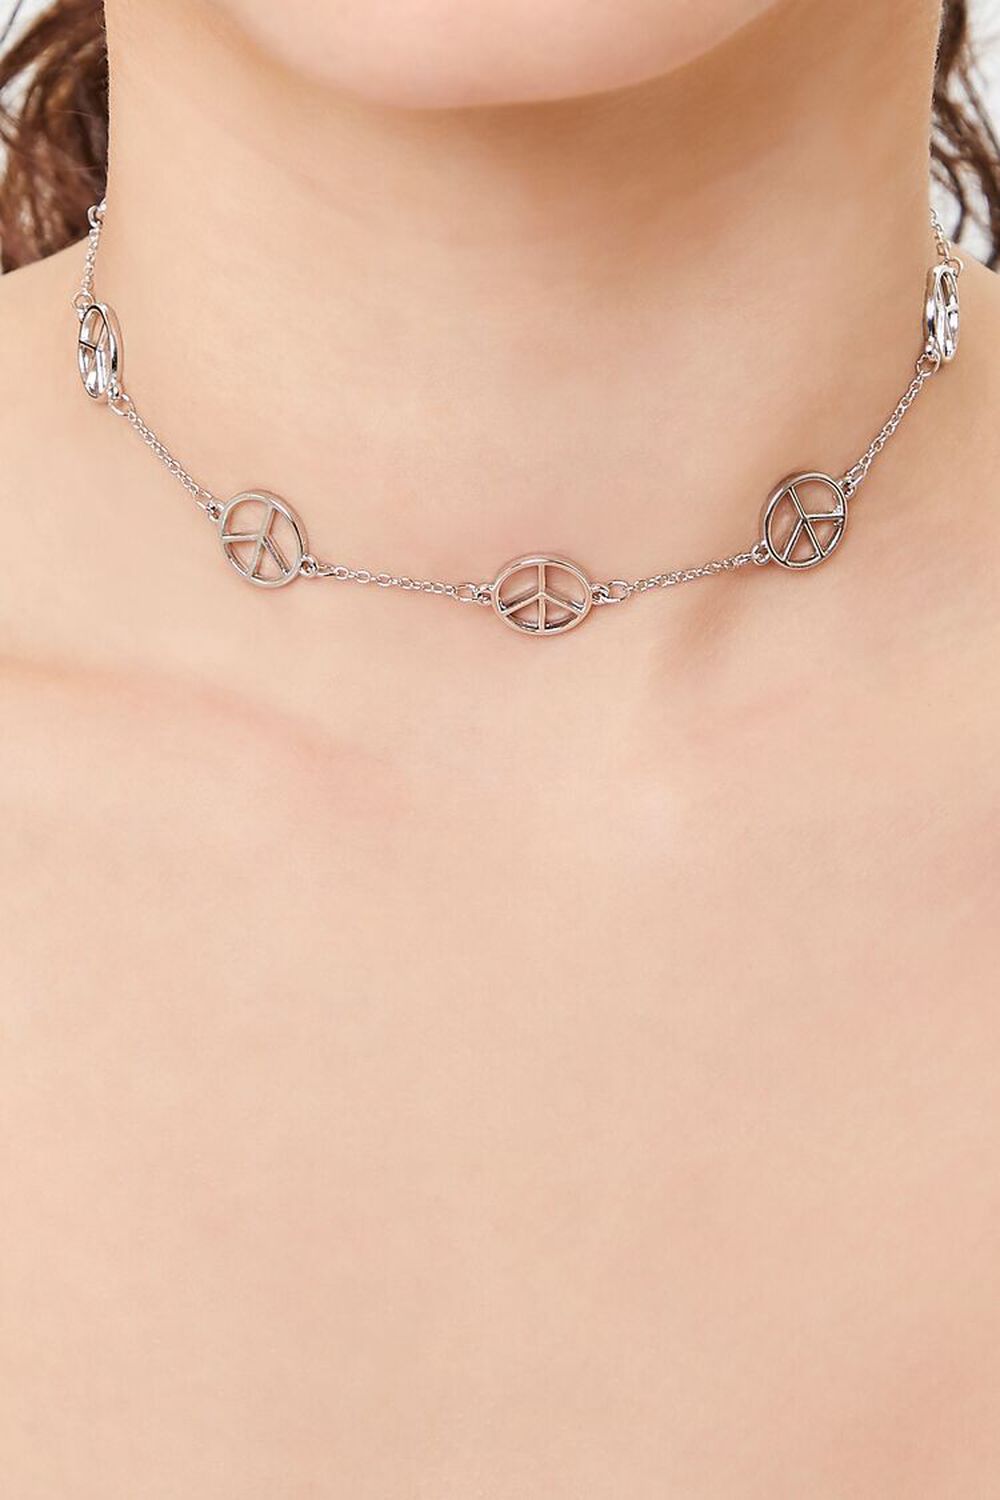 SILVER Peace Sign Chain Choker Necklace, image 1